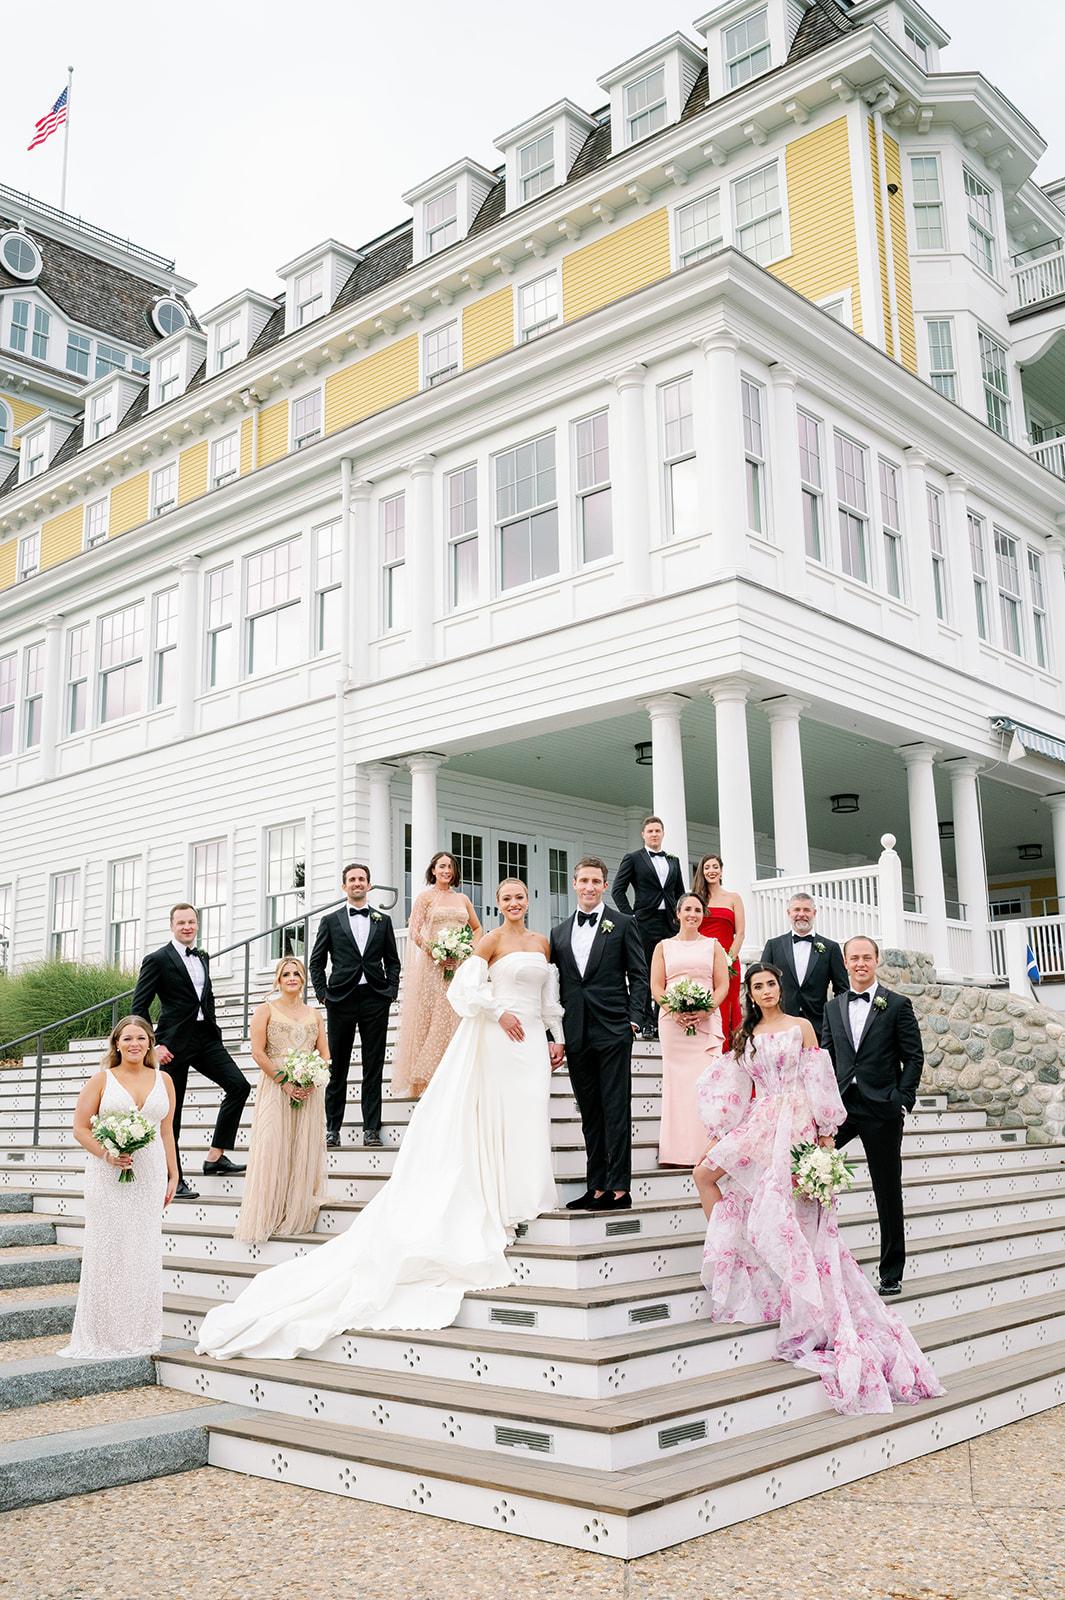 Posed editorial wedding party portrait on the steps of Ocean House in Rhode Island.  